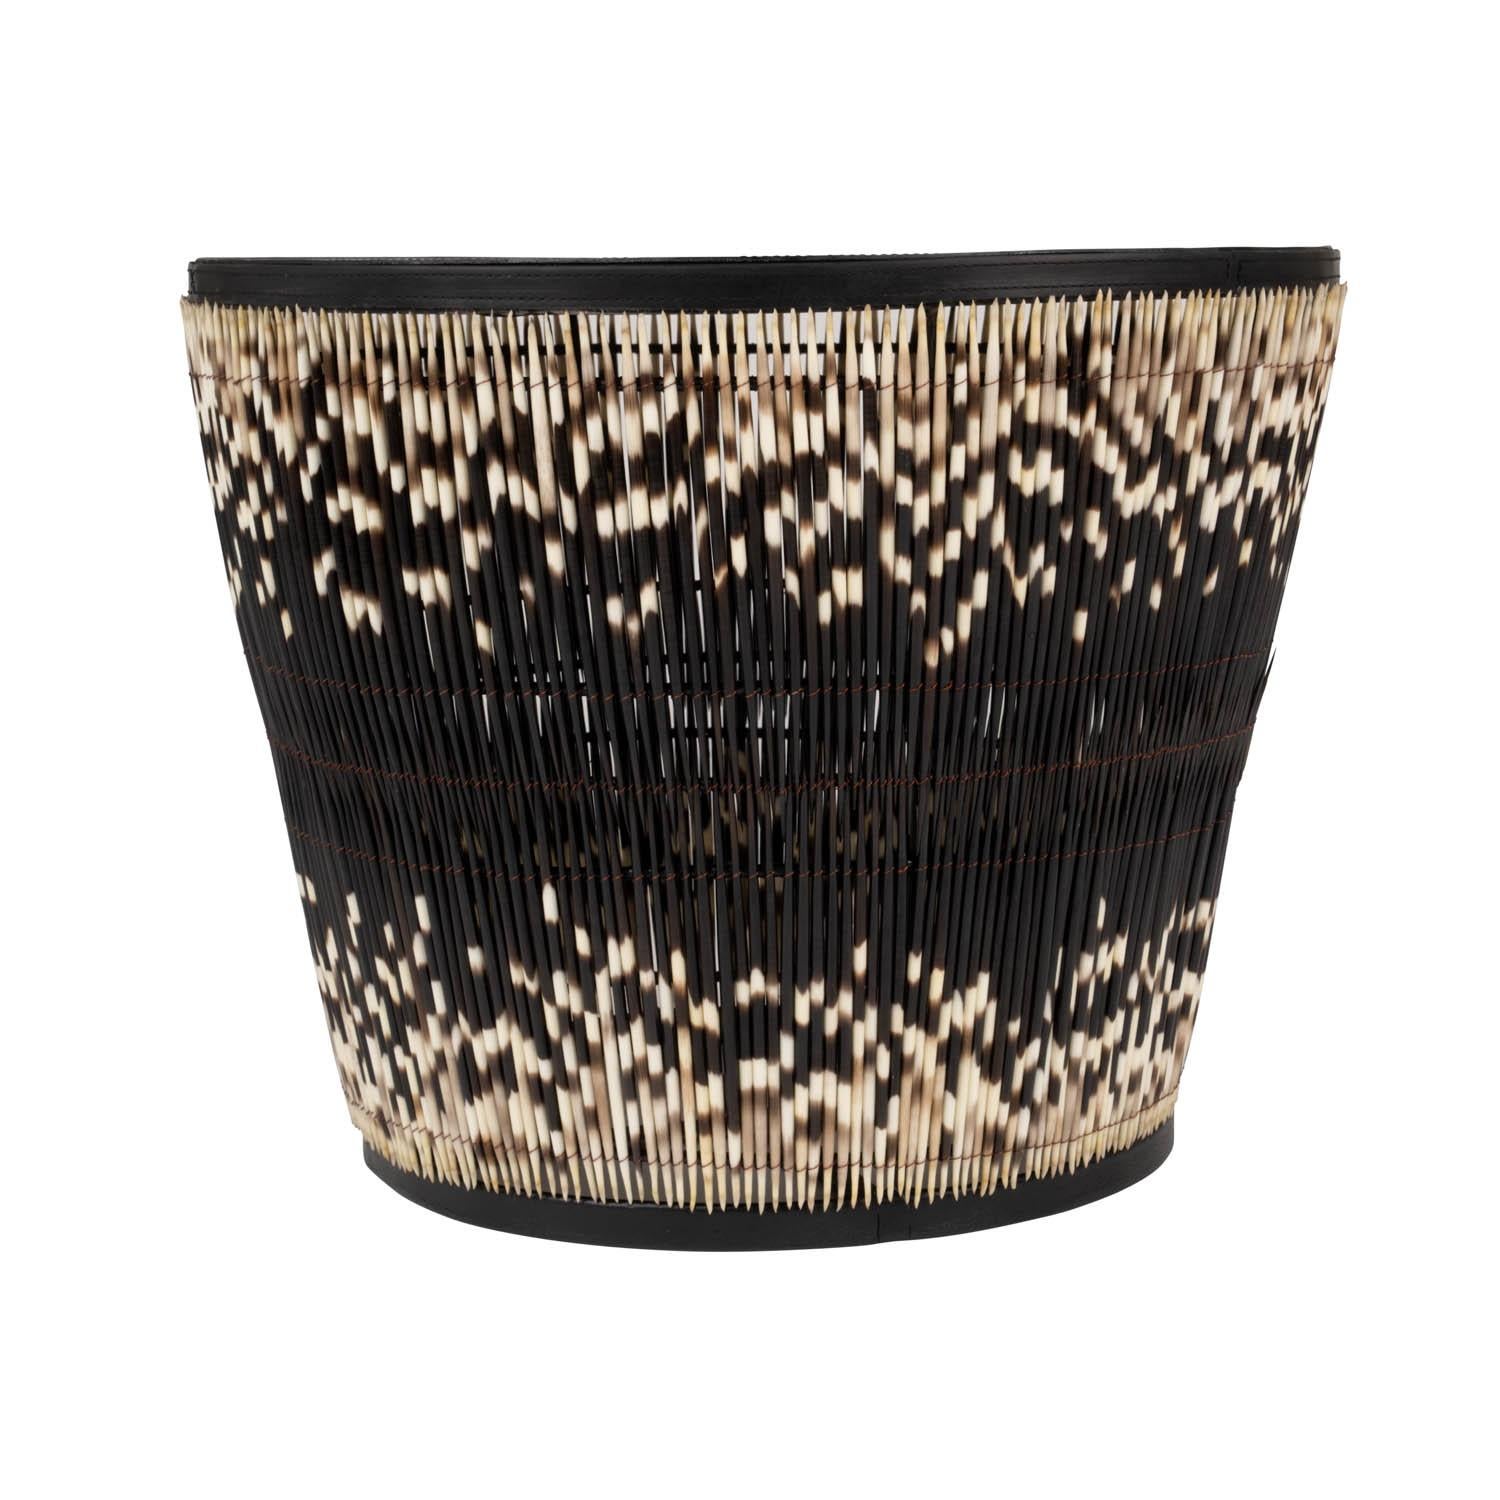 Unique and exciting, this side table is handcrafted of powder-coated metal with genuine porcupine quill. Humanely gathered, the quills form a stunning exterior to the table, with two rows secured into a beguiling pattern allowing the natural color